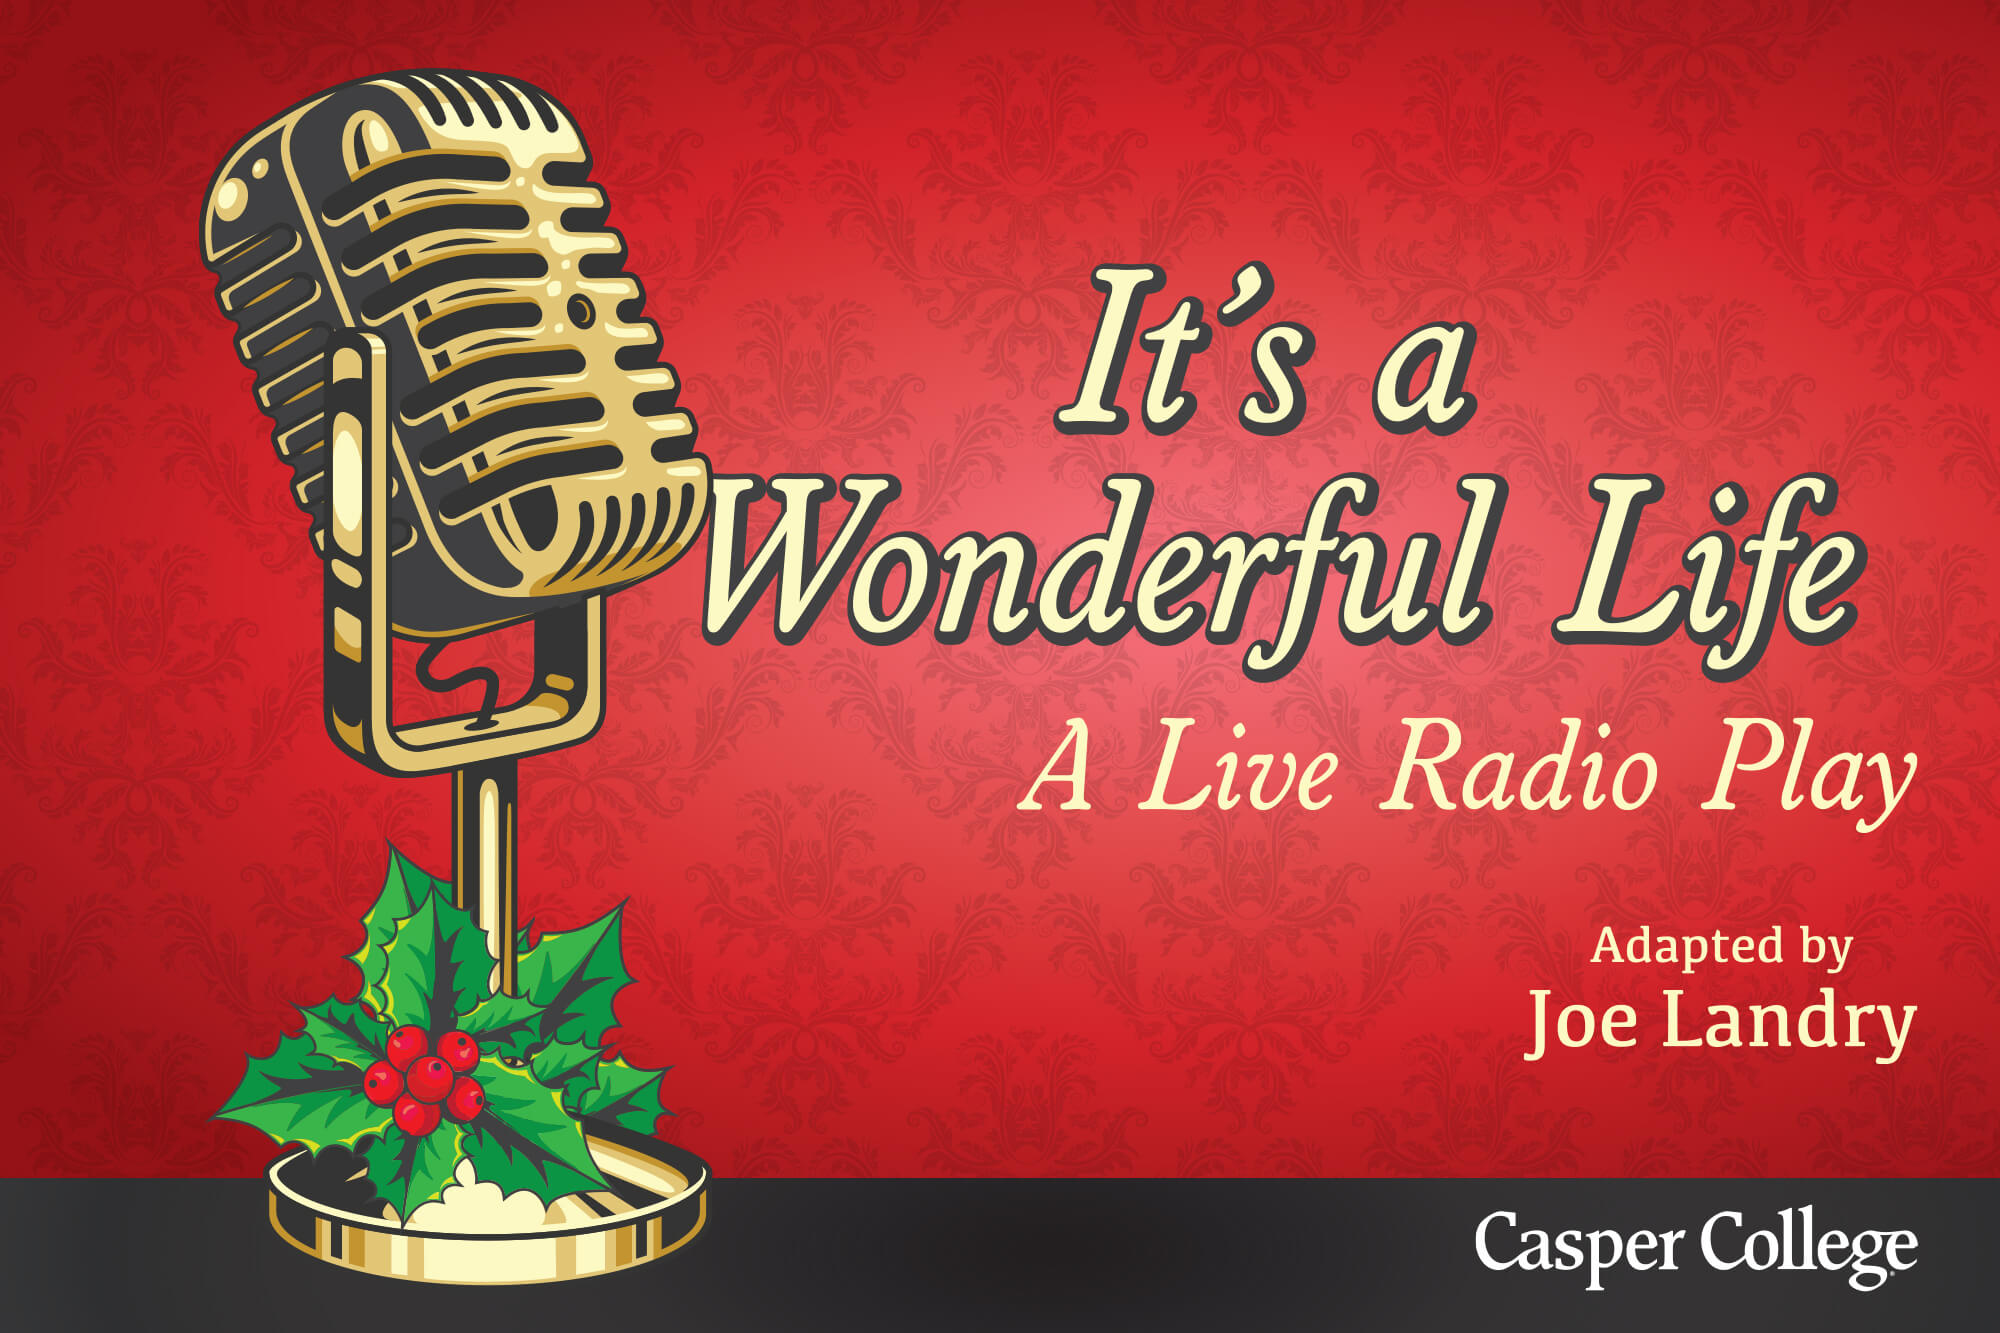 Image for "It's a Wonderful Life — A Live Radio Play" press release.